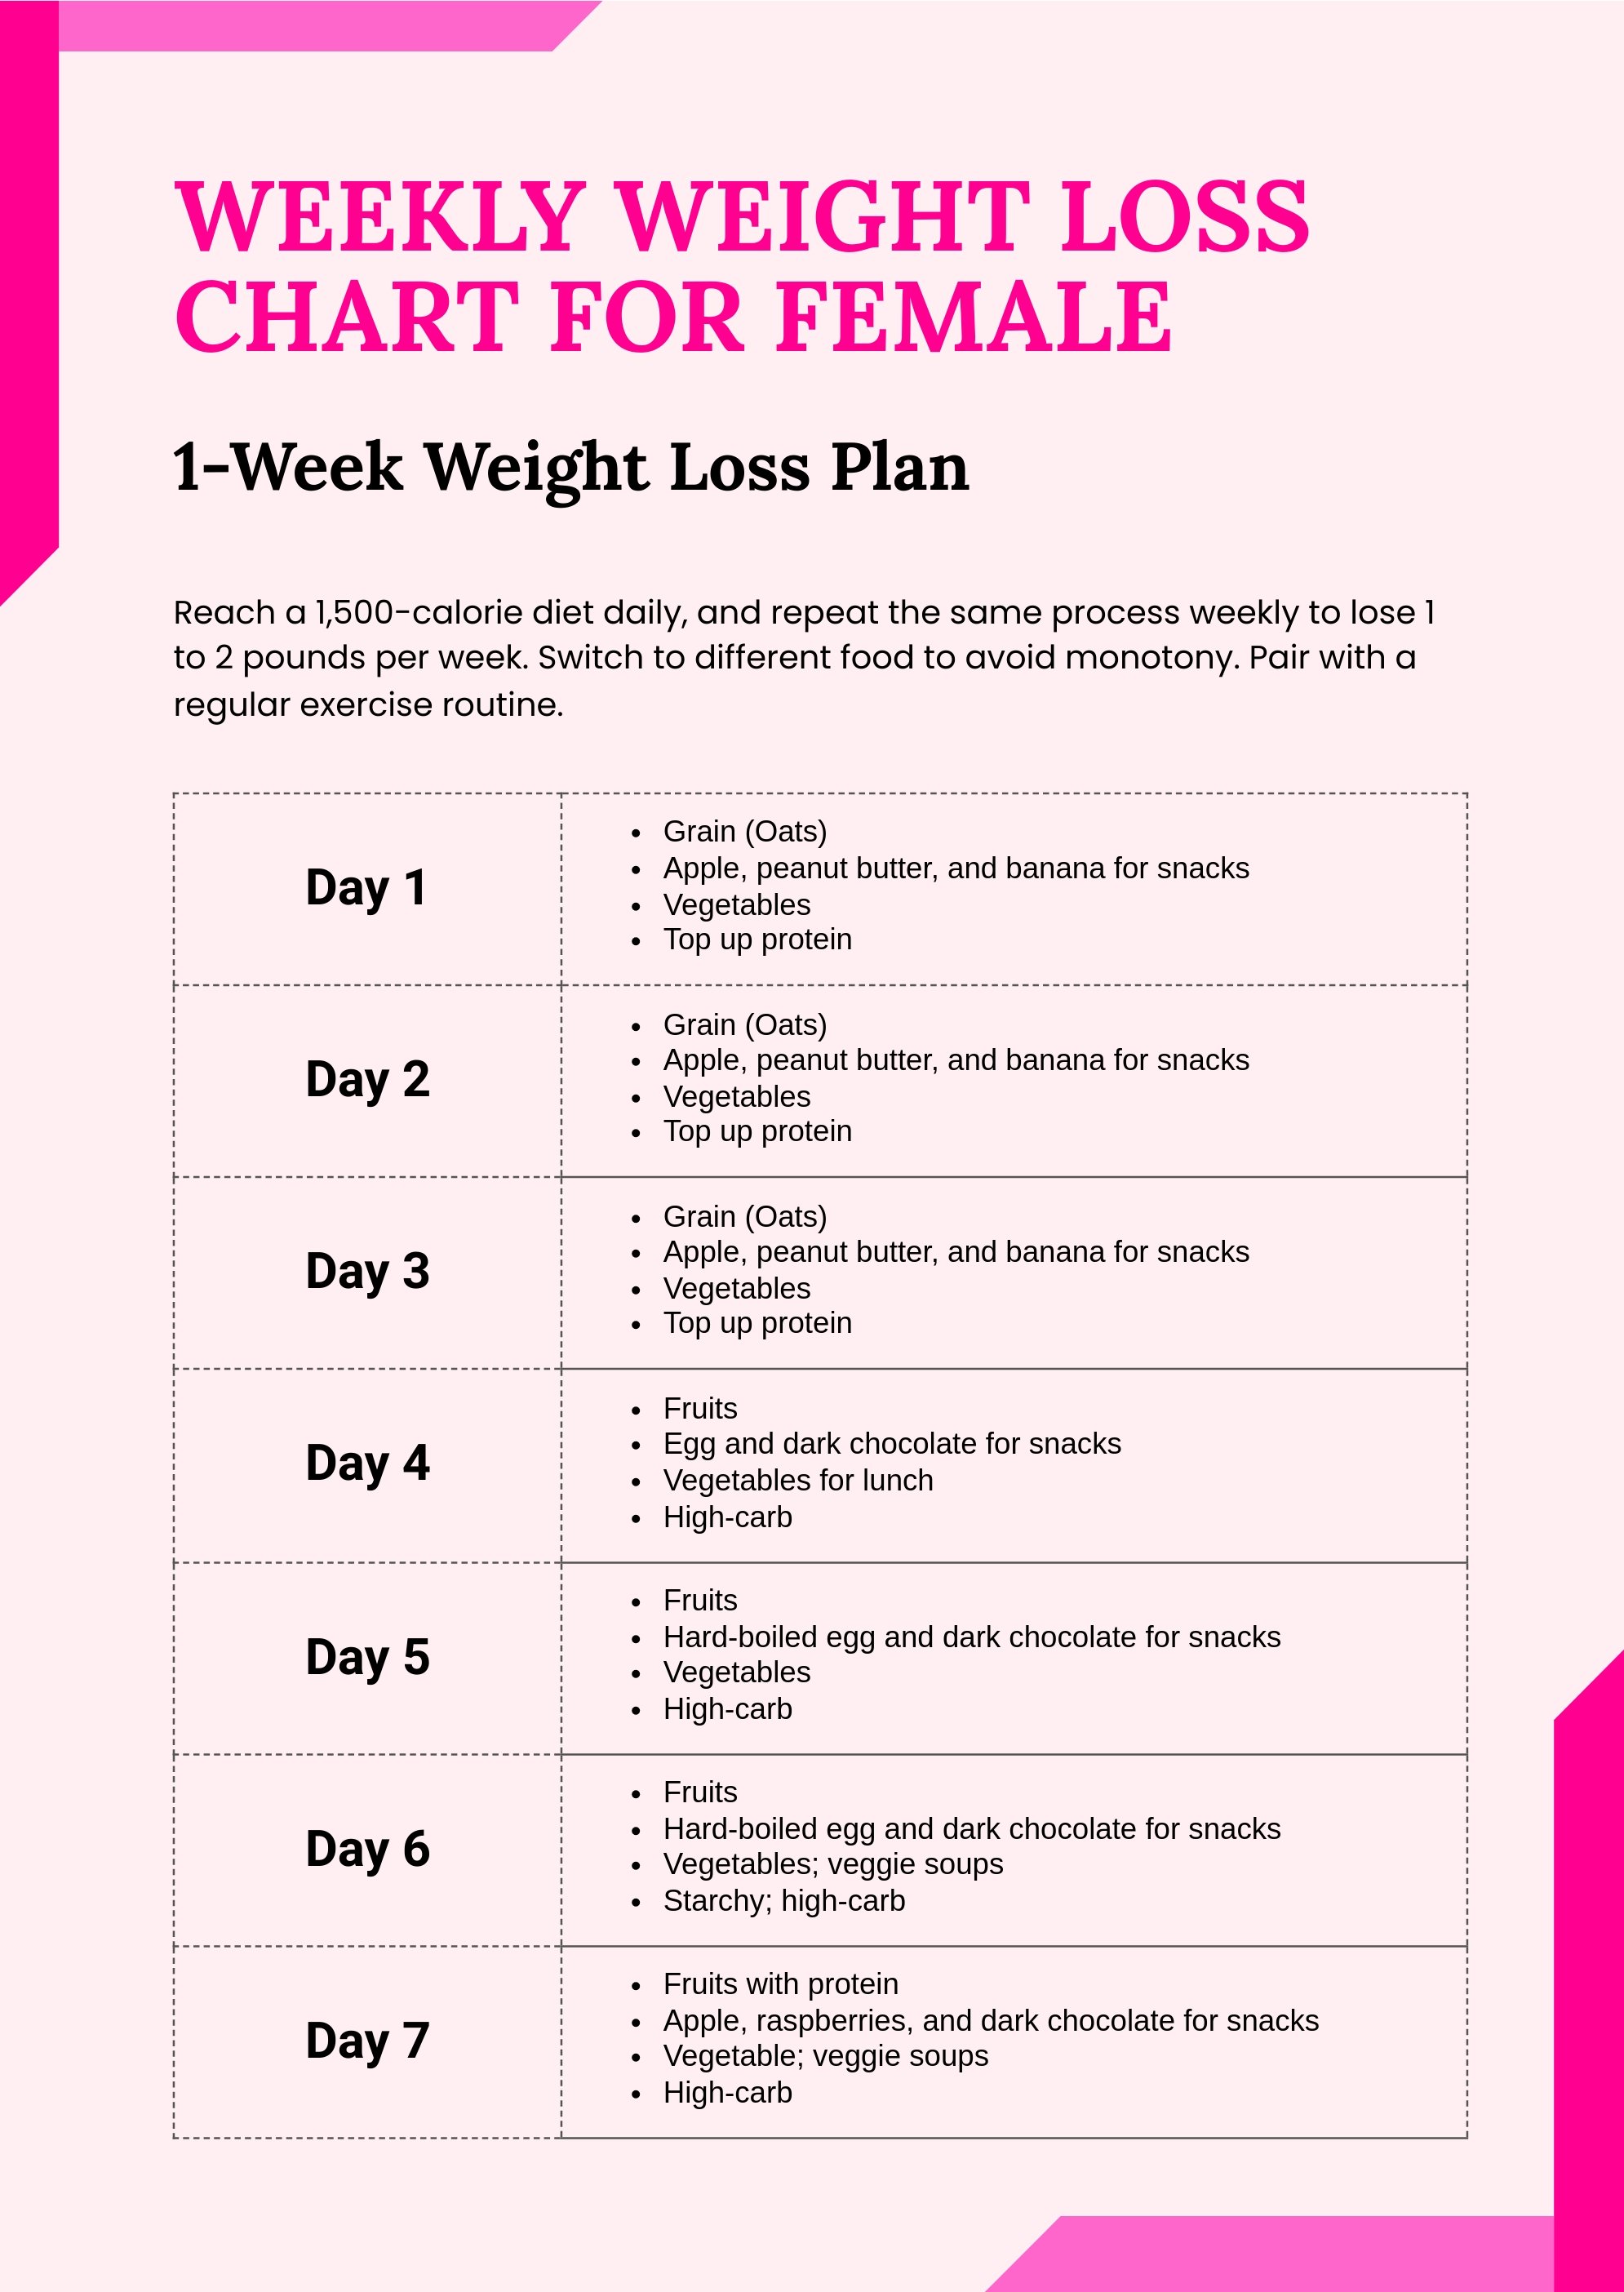 Weekly Weight Loss Chart For Female in PDF, Illustrator